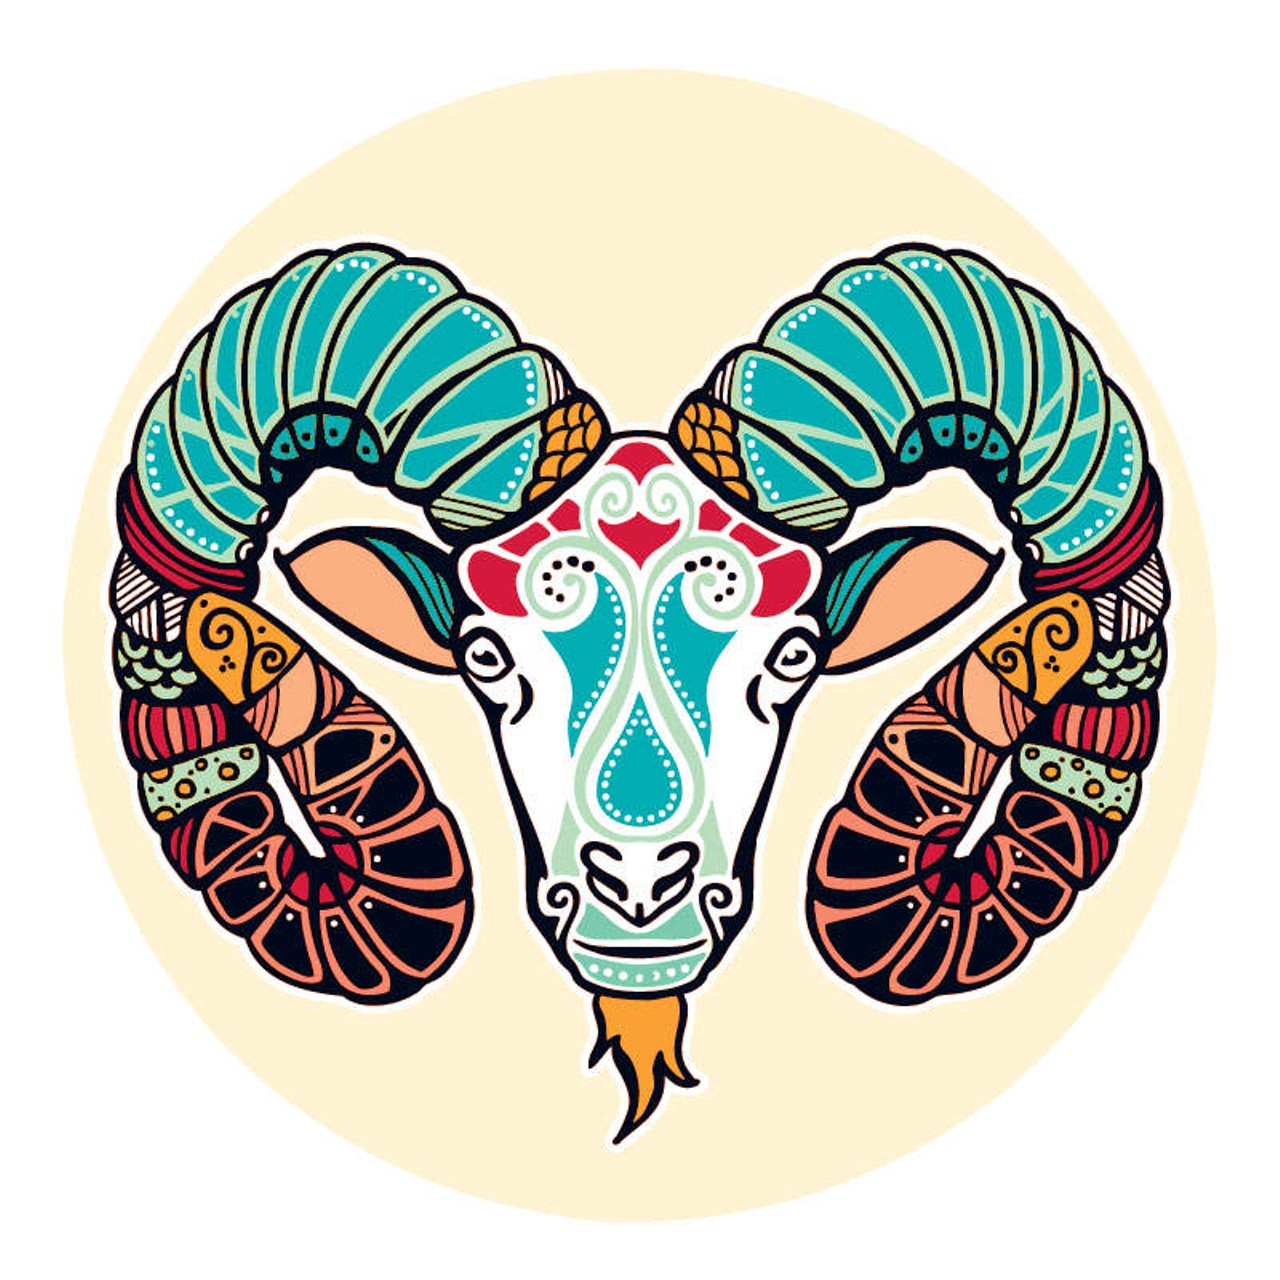 ARIES (March 21- April 20): 
You can perform miracles. Any doubt that this is true could hold you back. At the moment, all kinds of good stuff is germinating. As you wonder what it will take to get from A to B, the deeper part of you sees this as a work in progress. At least now you are sure that your time has been well spent. One day at a time, and the idea that we birth our dreams as we go, are thoughts to keep in mind. Blasts from the past, and other old ghosts are due to resurface with all kinds of issues on their minds. Don&#146;t let them eat up too much of your attention. You have bigger fish to fry.